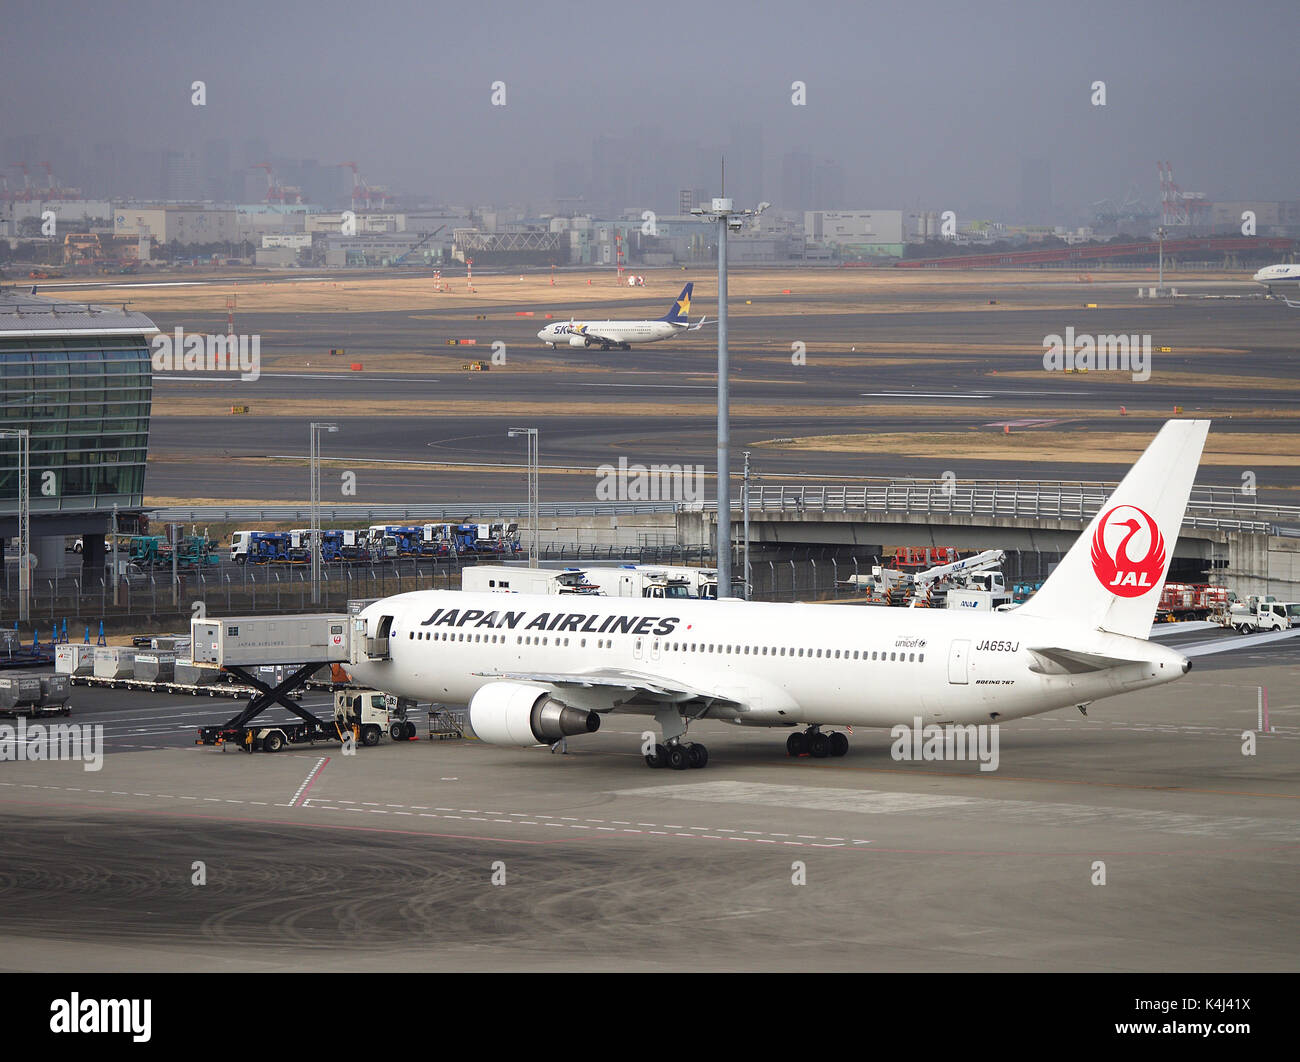 Japan Airlines Boeing 767-346(ER) (JA653J) parked at New Chitose Airport apron, Hokkaido, Japan Stock Photo